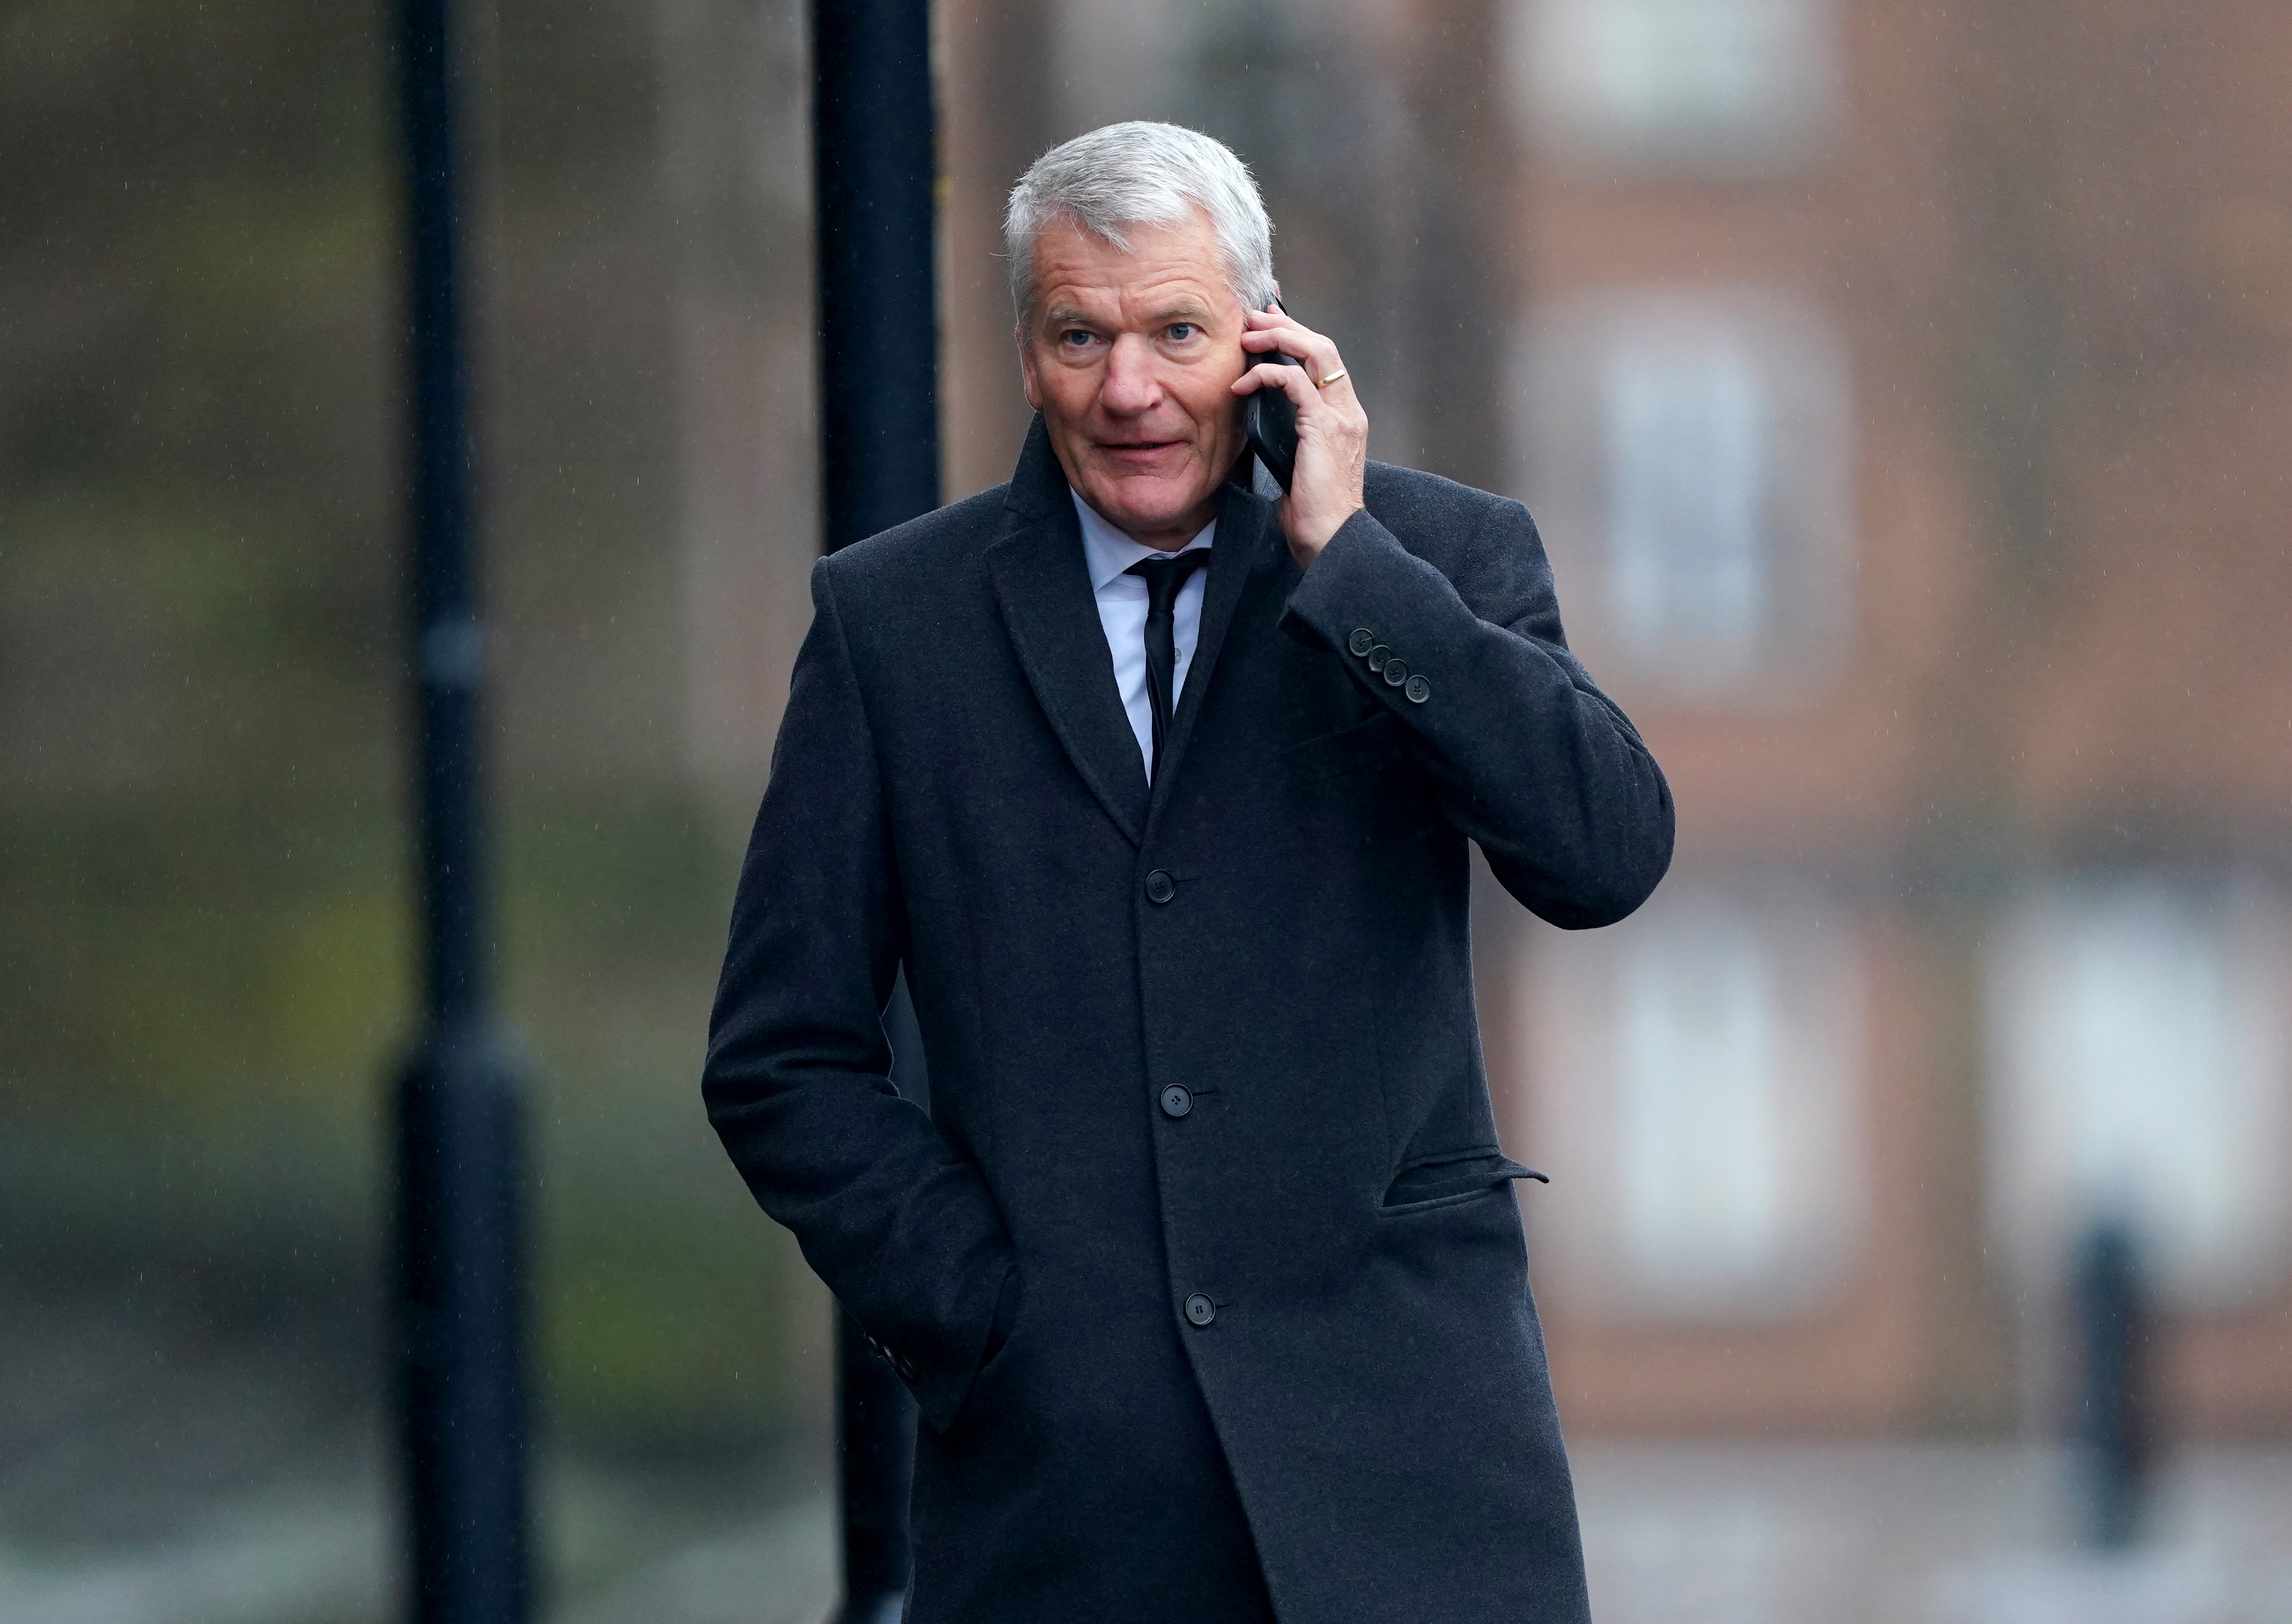 UEFA treasurer David Gill raised objections to the proposal in December